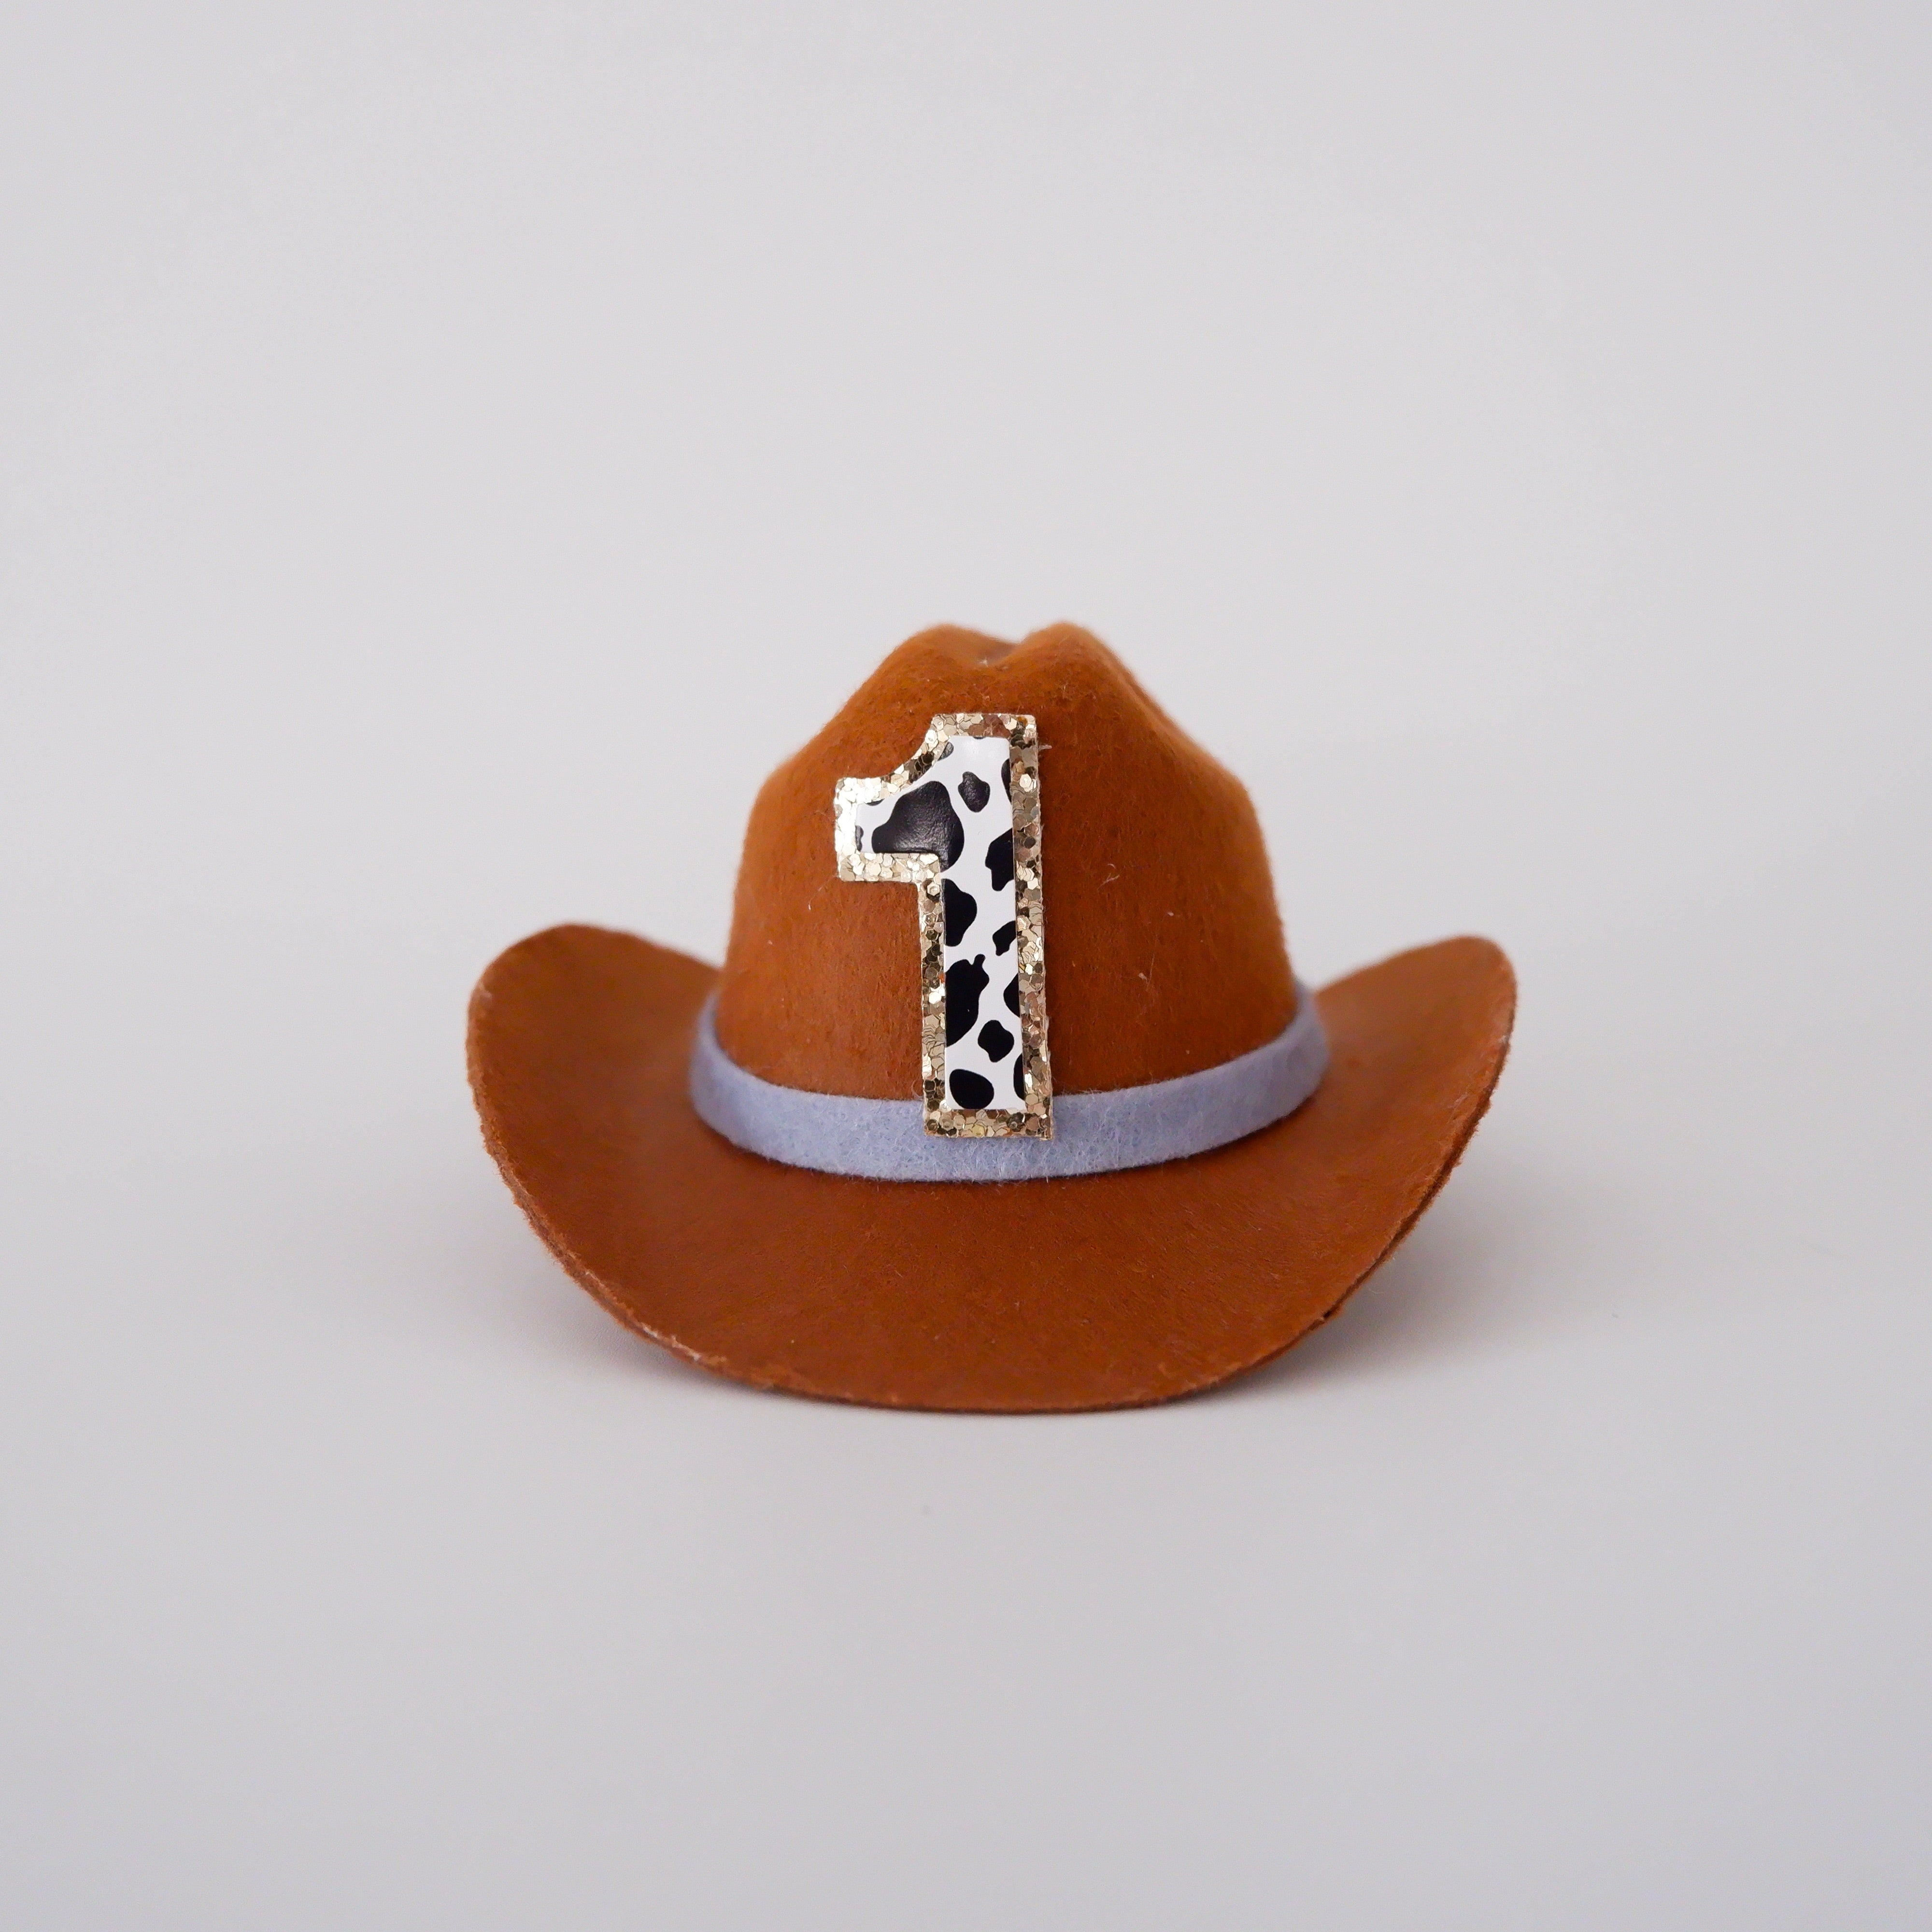 Our Little Deer My First Rodeo Mini Cowboy Hat